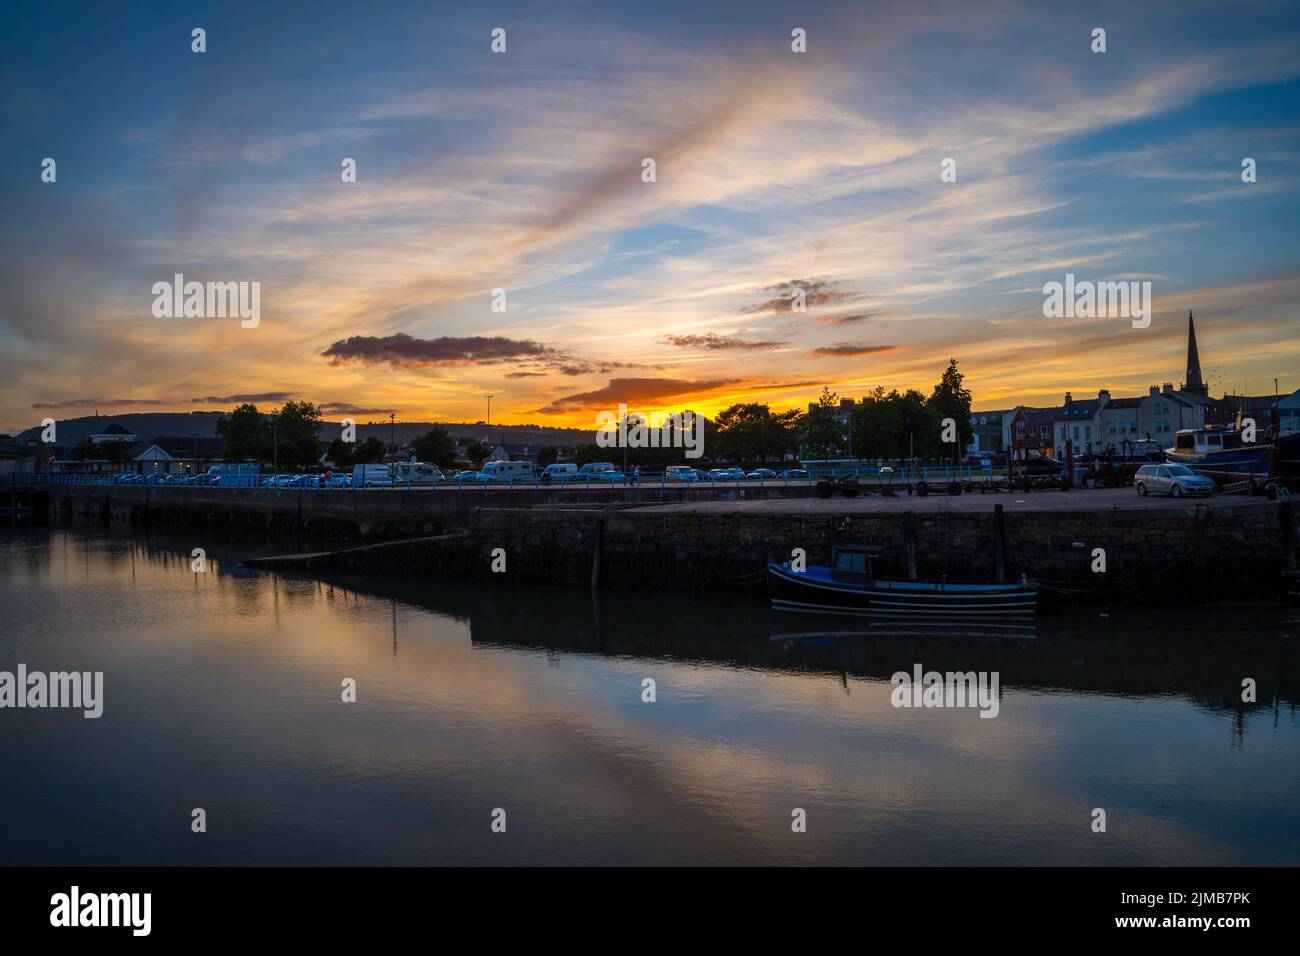 A beautiful sunset in Carrickfergus harbor with waterscape and boats Stock Photo